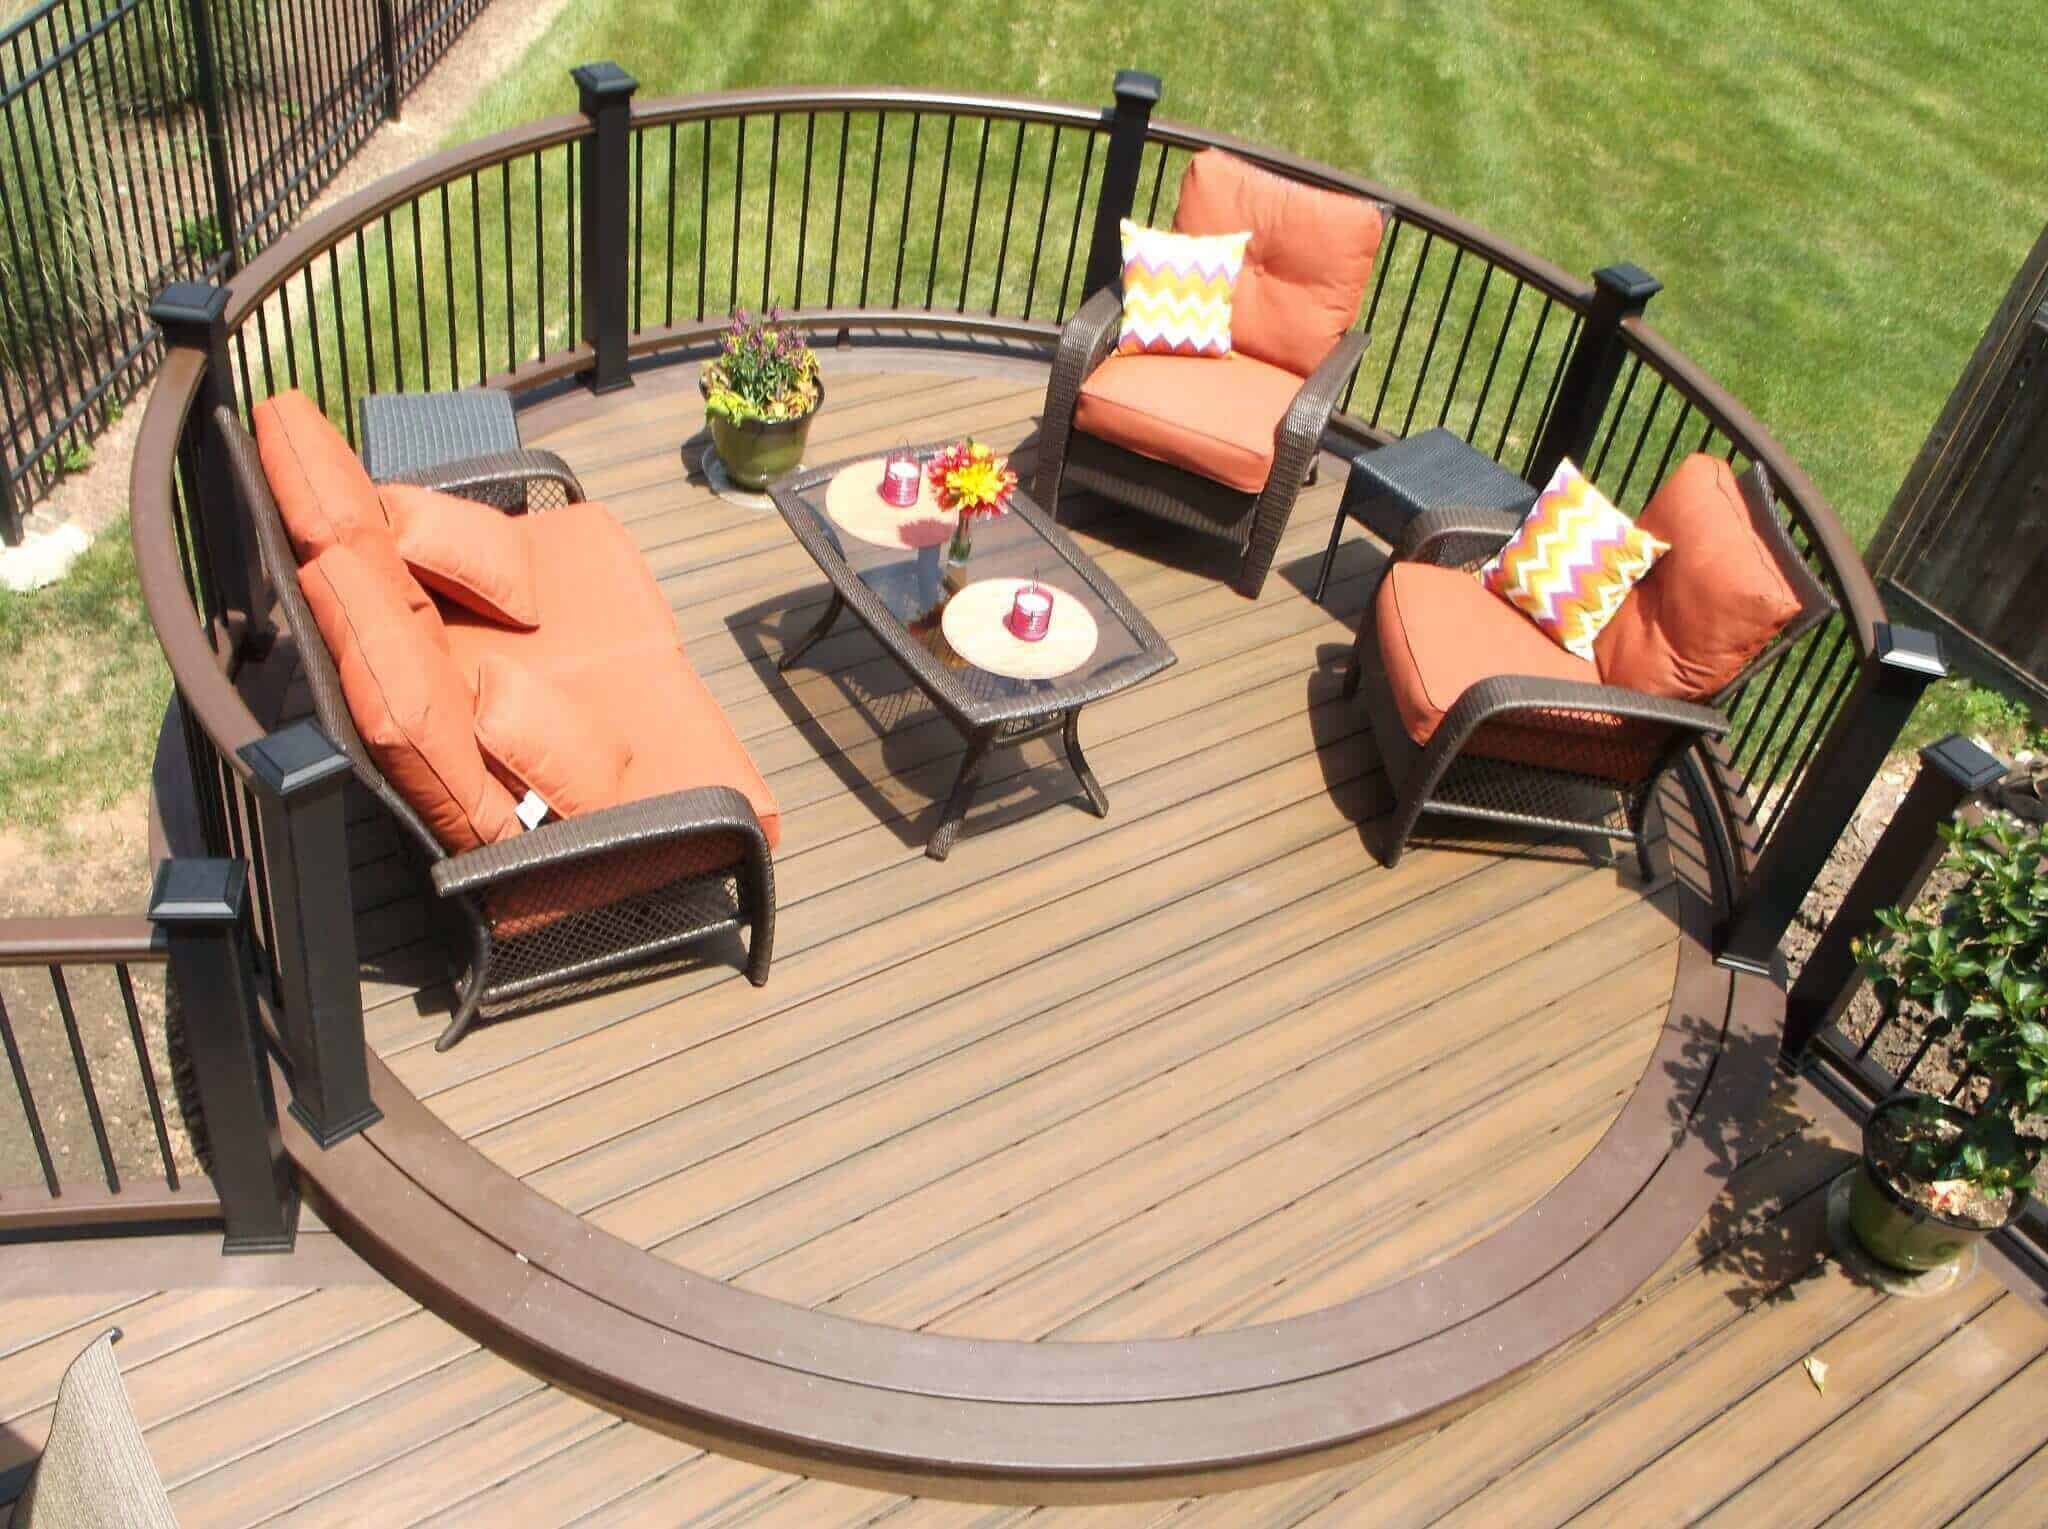 Why decking is crucial